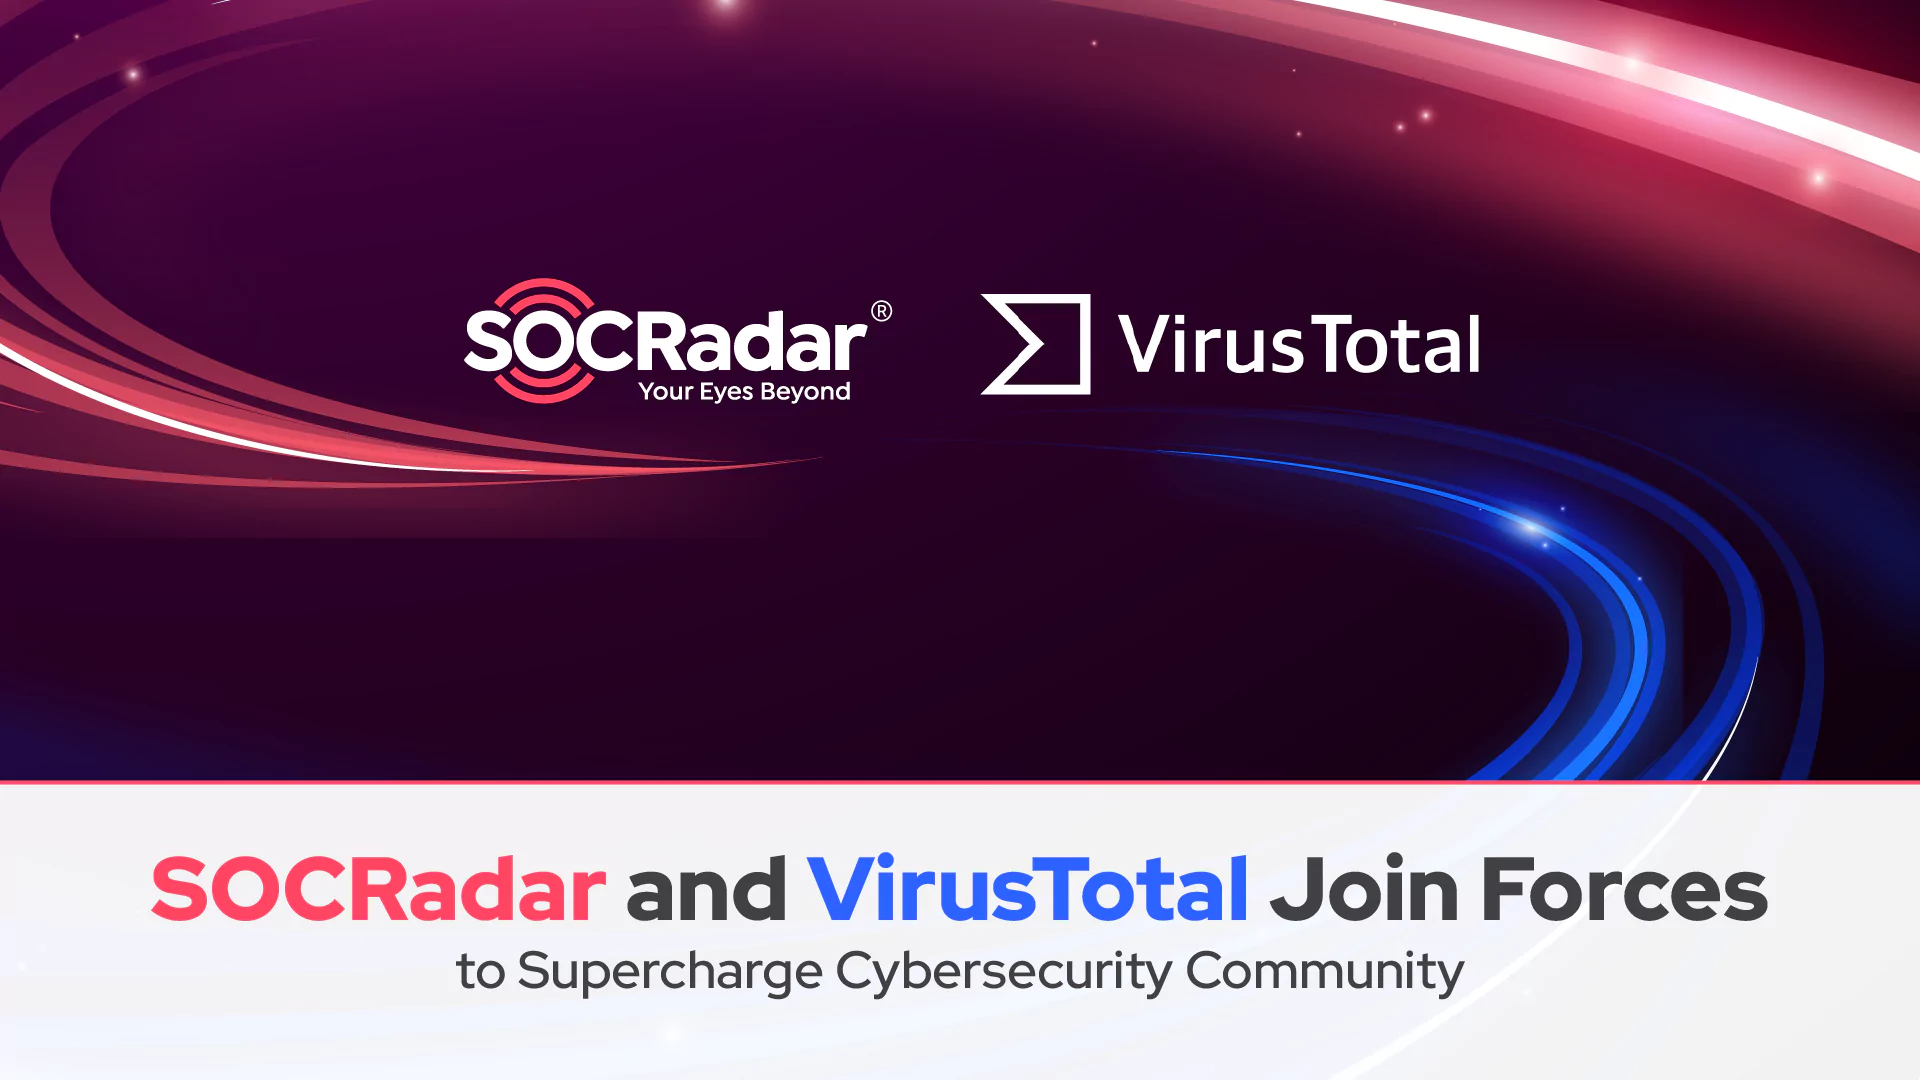 SOCRadar® Cyber Intelligence Inc. | SOCRadar and VirusTotal Join Forces to Supercharge Cybersecurity Community